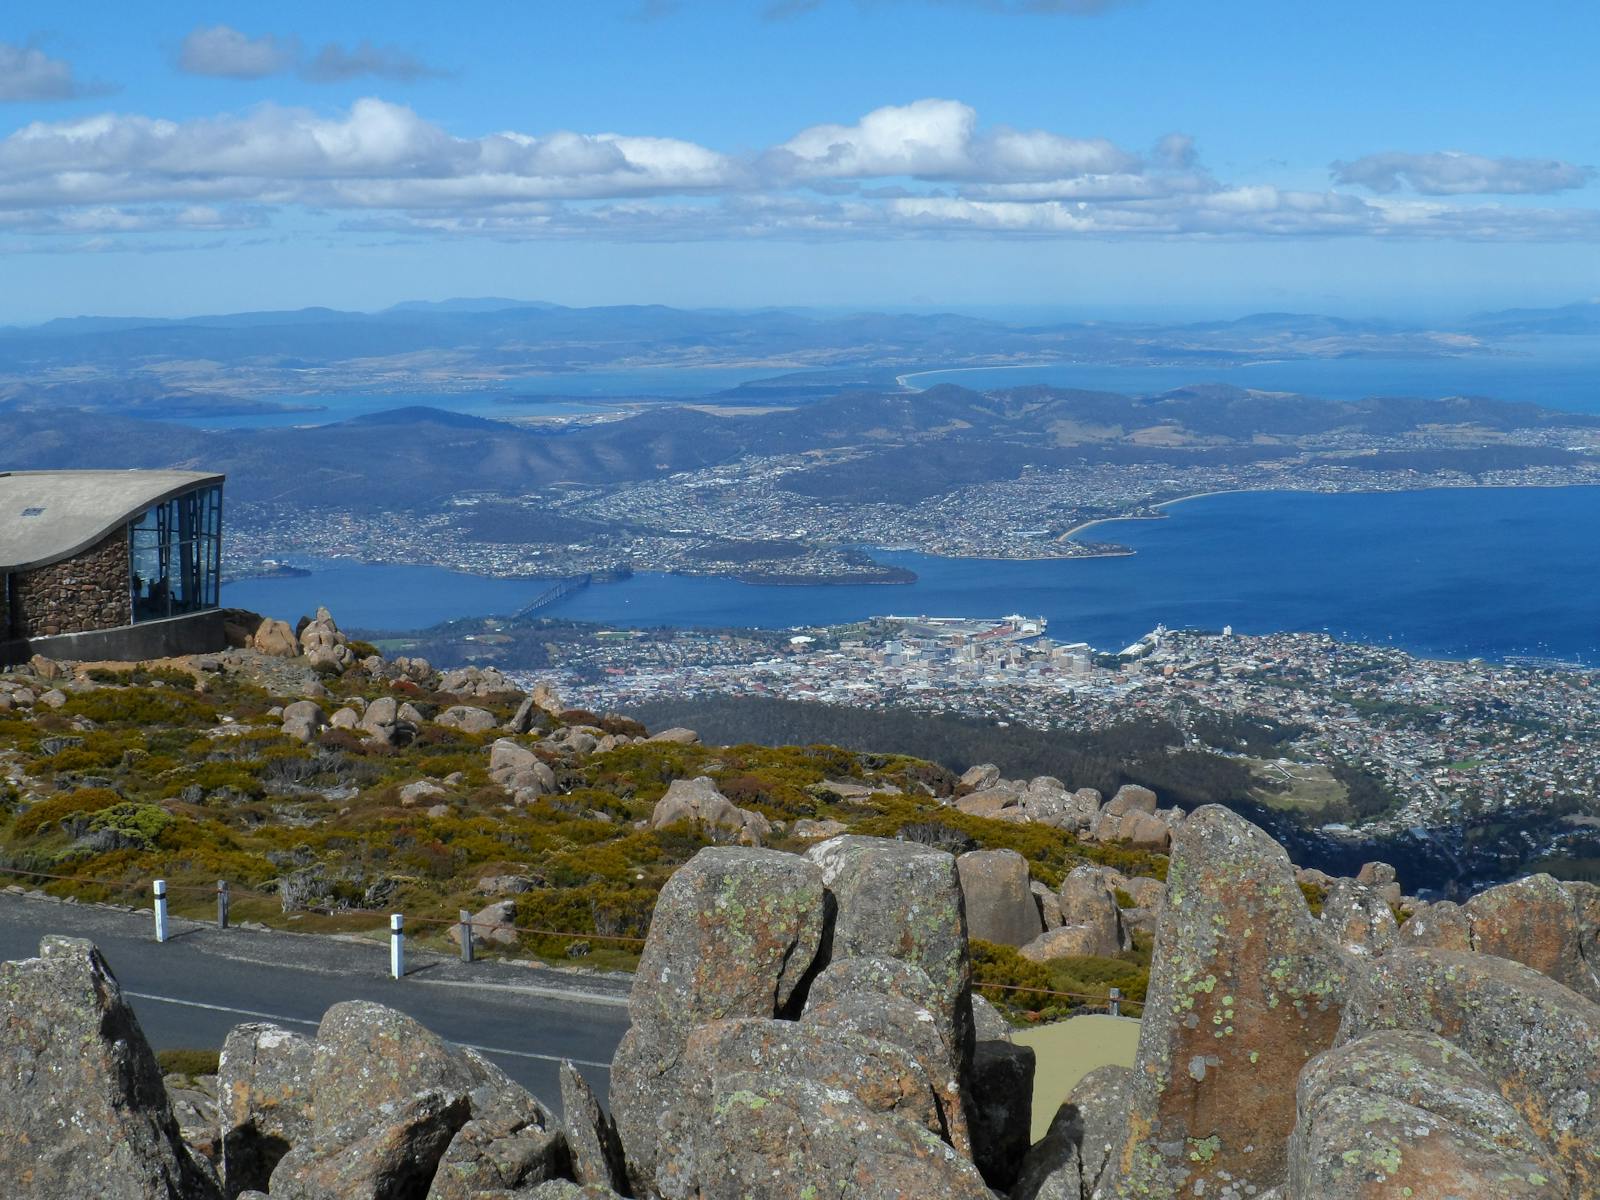 Just a 30 minute drive from the City to the summit of Mt. Wellington